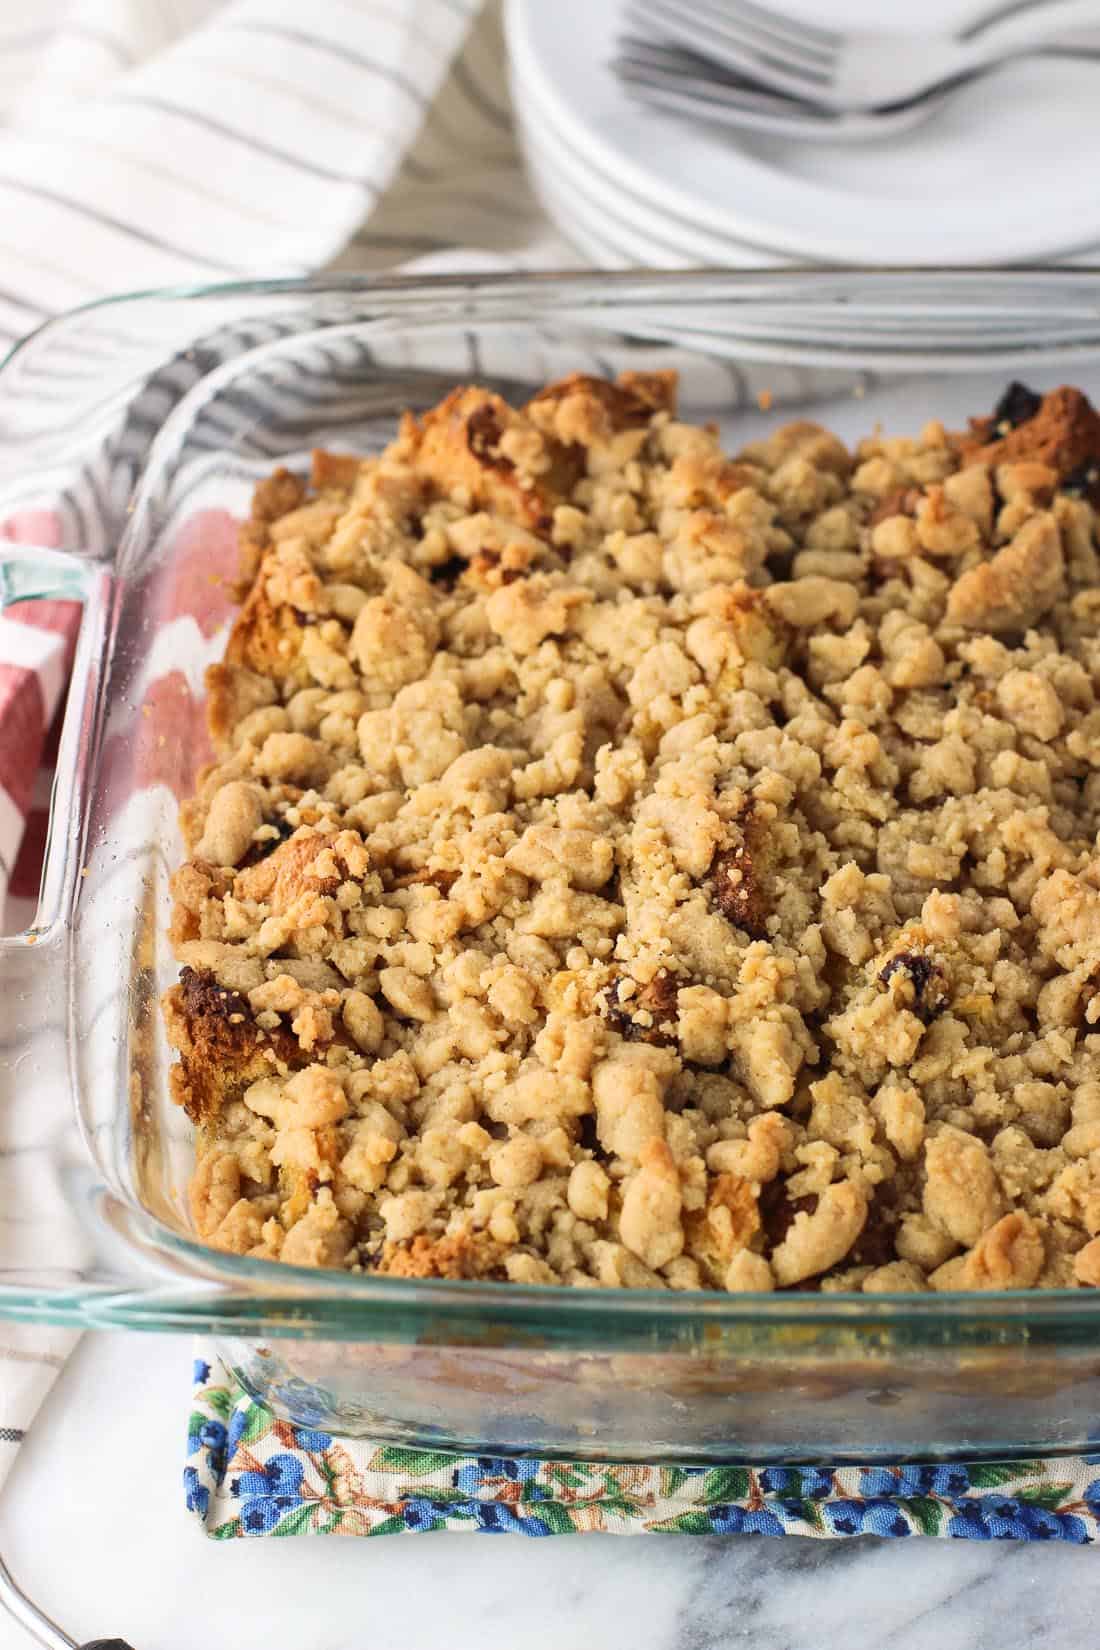 The french toast bake, covered in crumbs, in a glass baking dish right out of the oven